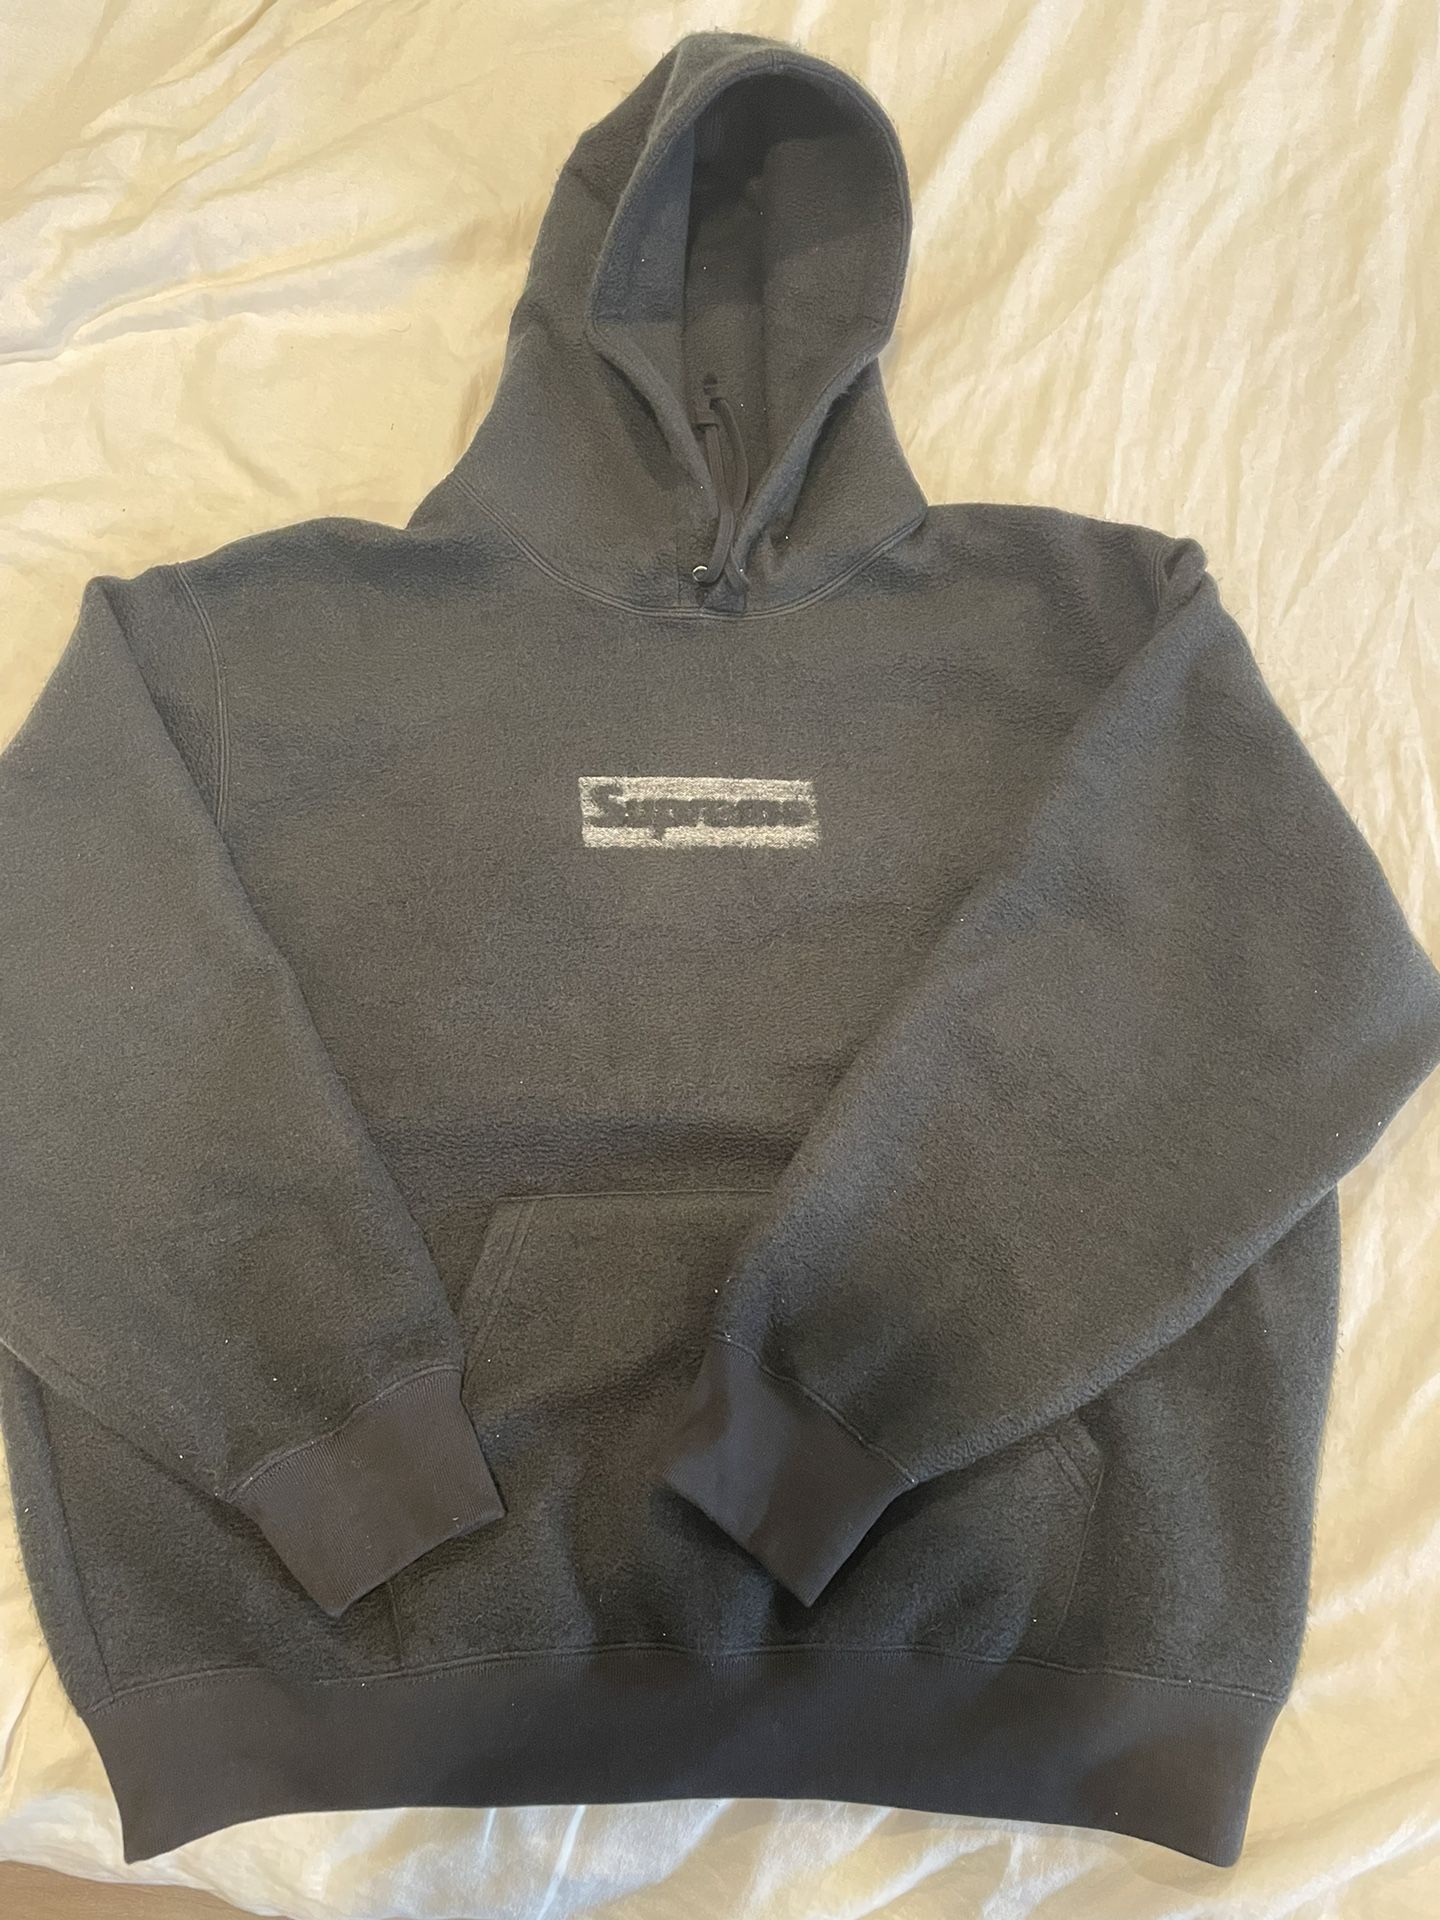 Supreme Inside Out Box Logo Hoodie Size Large New Deadstock Adult Mens Grey  Sweatshirt Pullover Hooded for Sale in Norcross, GA - OfferUp